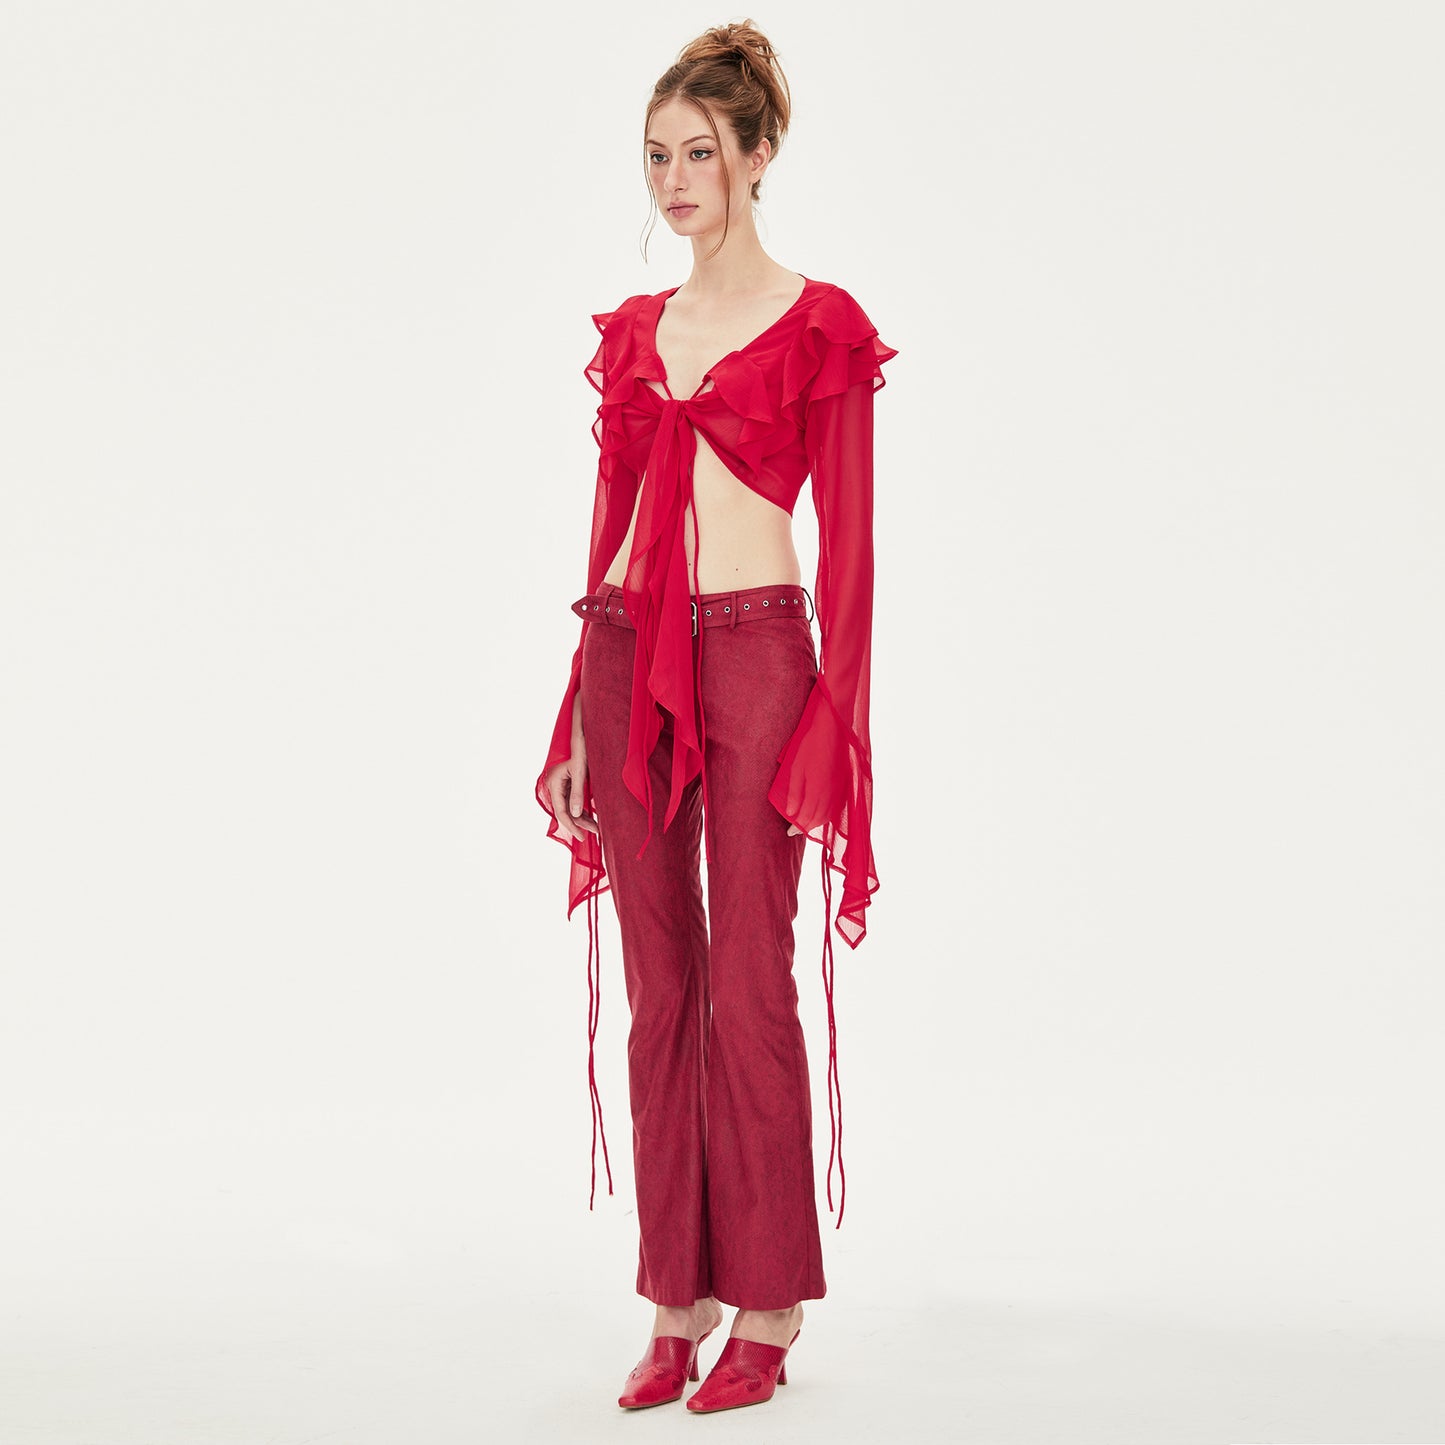 Kelly V-neck Ruffled Chiffon Crop Blouse in Red